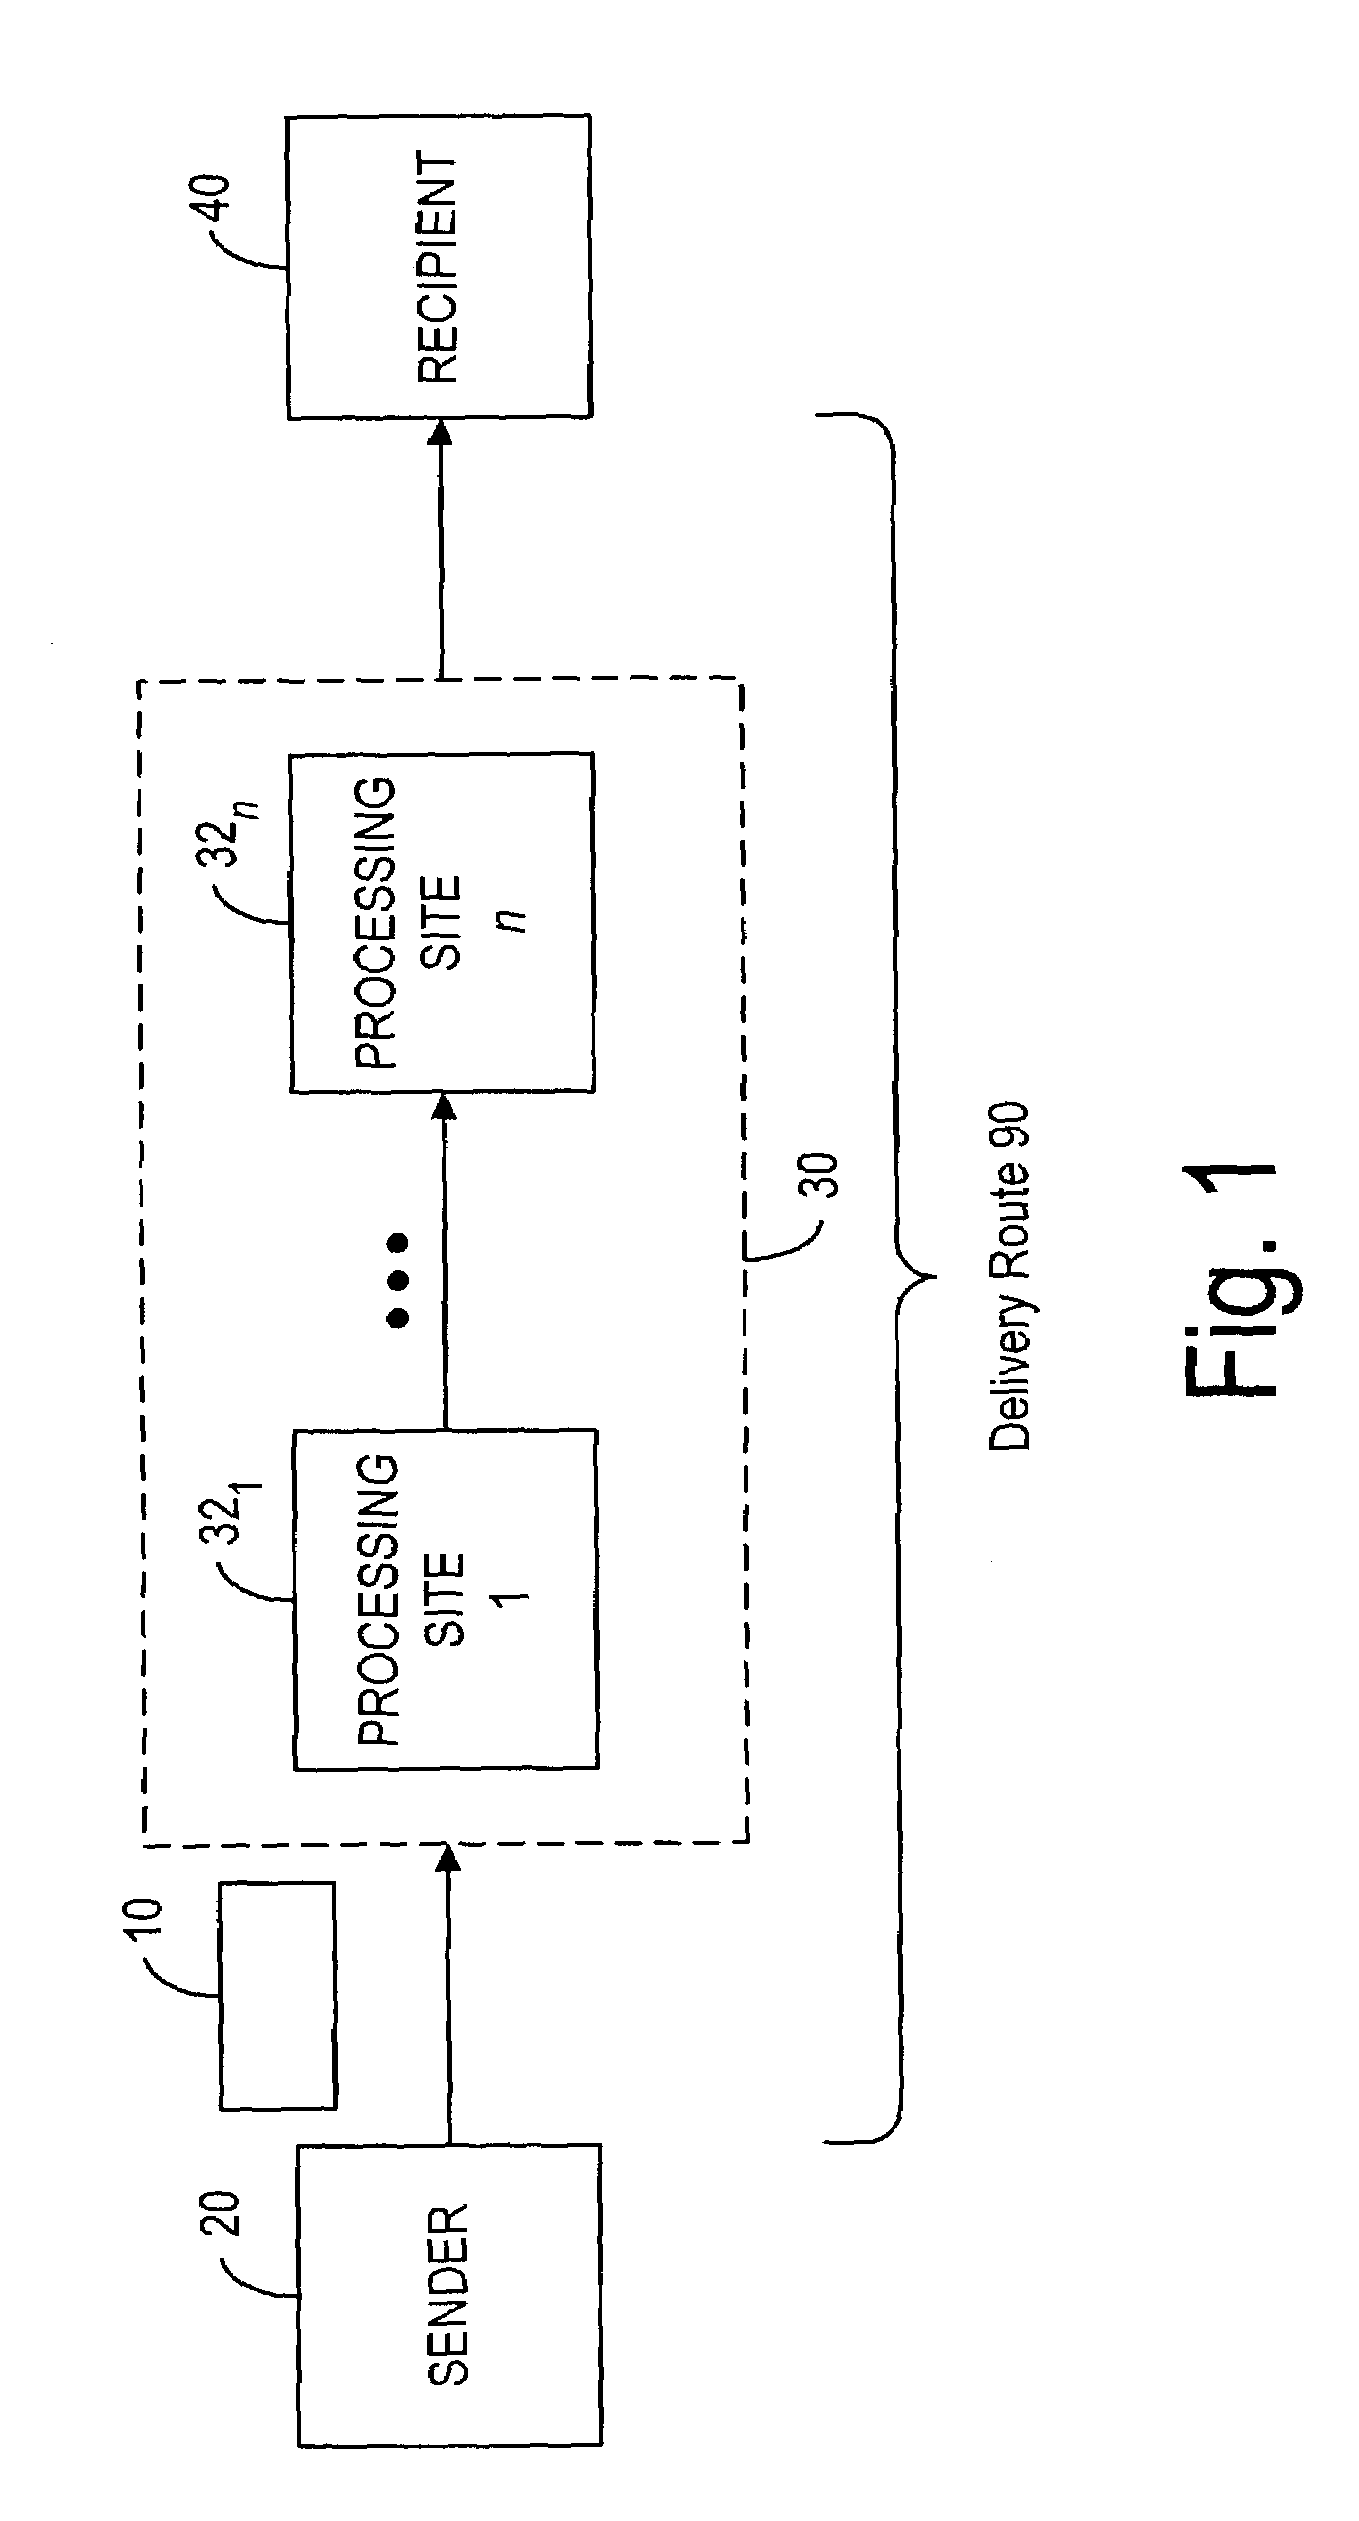 Reusable electronic tag for secure data accumulation